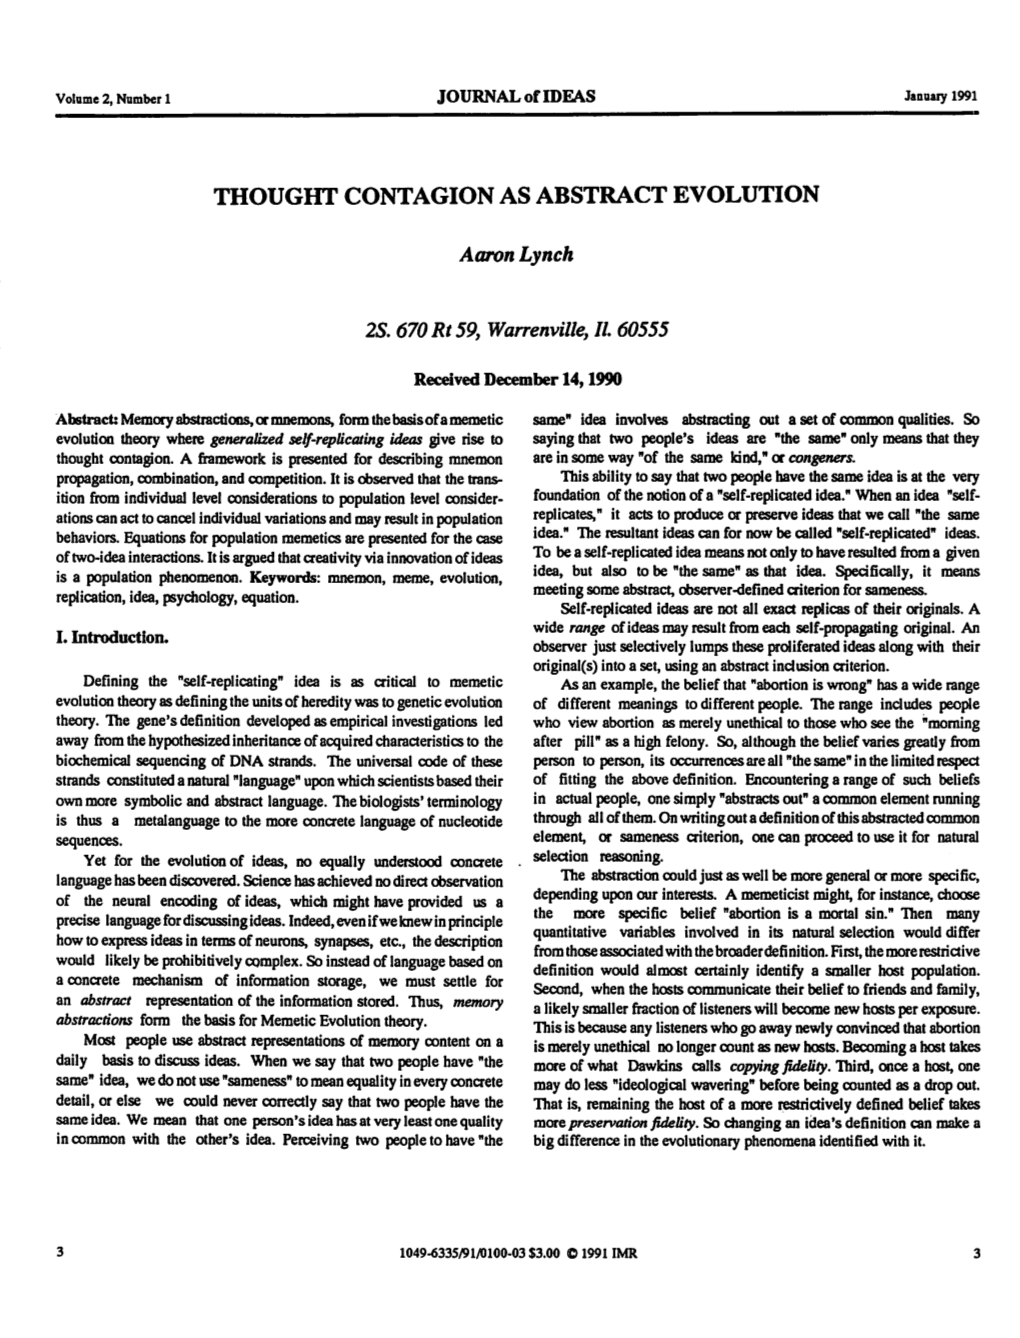 THOUGHT CONTAGION AS ABSTRACT EVOLUTION Aaron